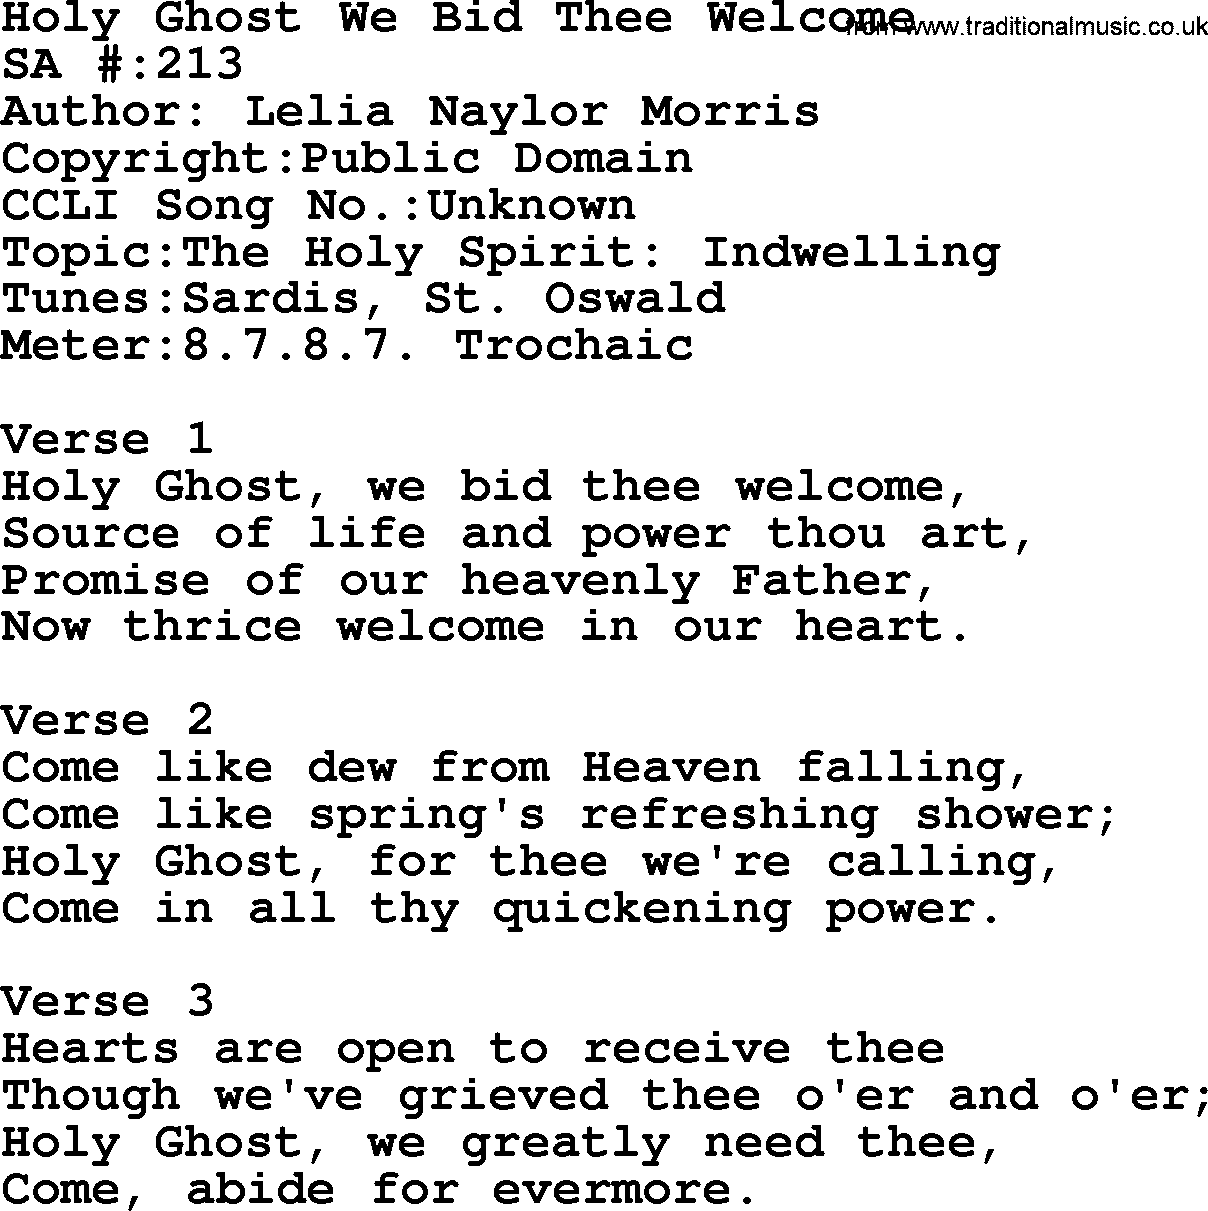 Salvation Army Hymnal, title: Holy Ghost We Bid Thee Welcome, with lyrics and PDF,